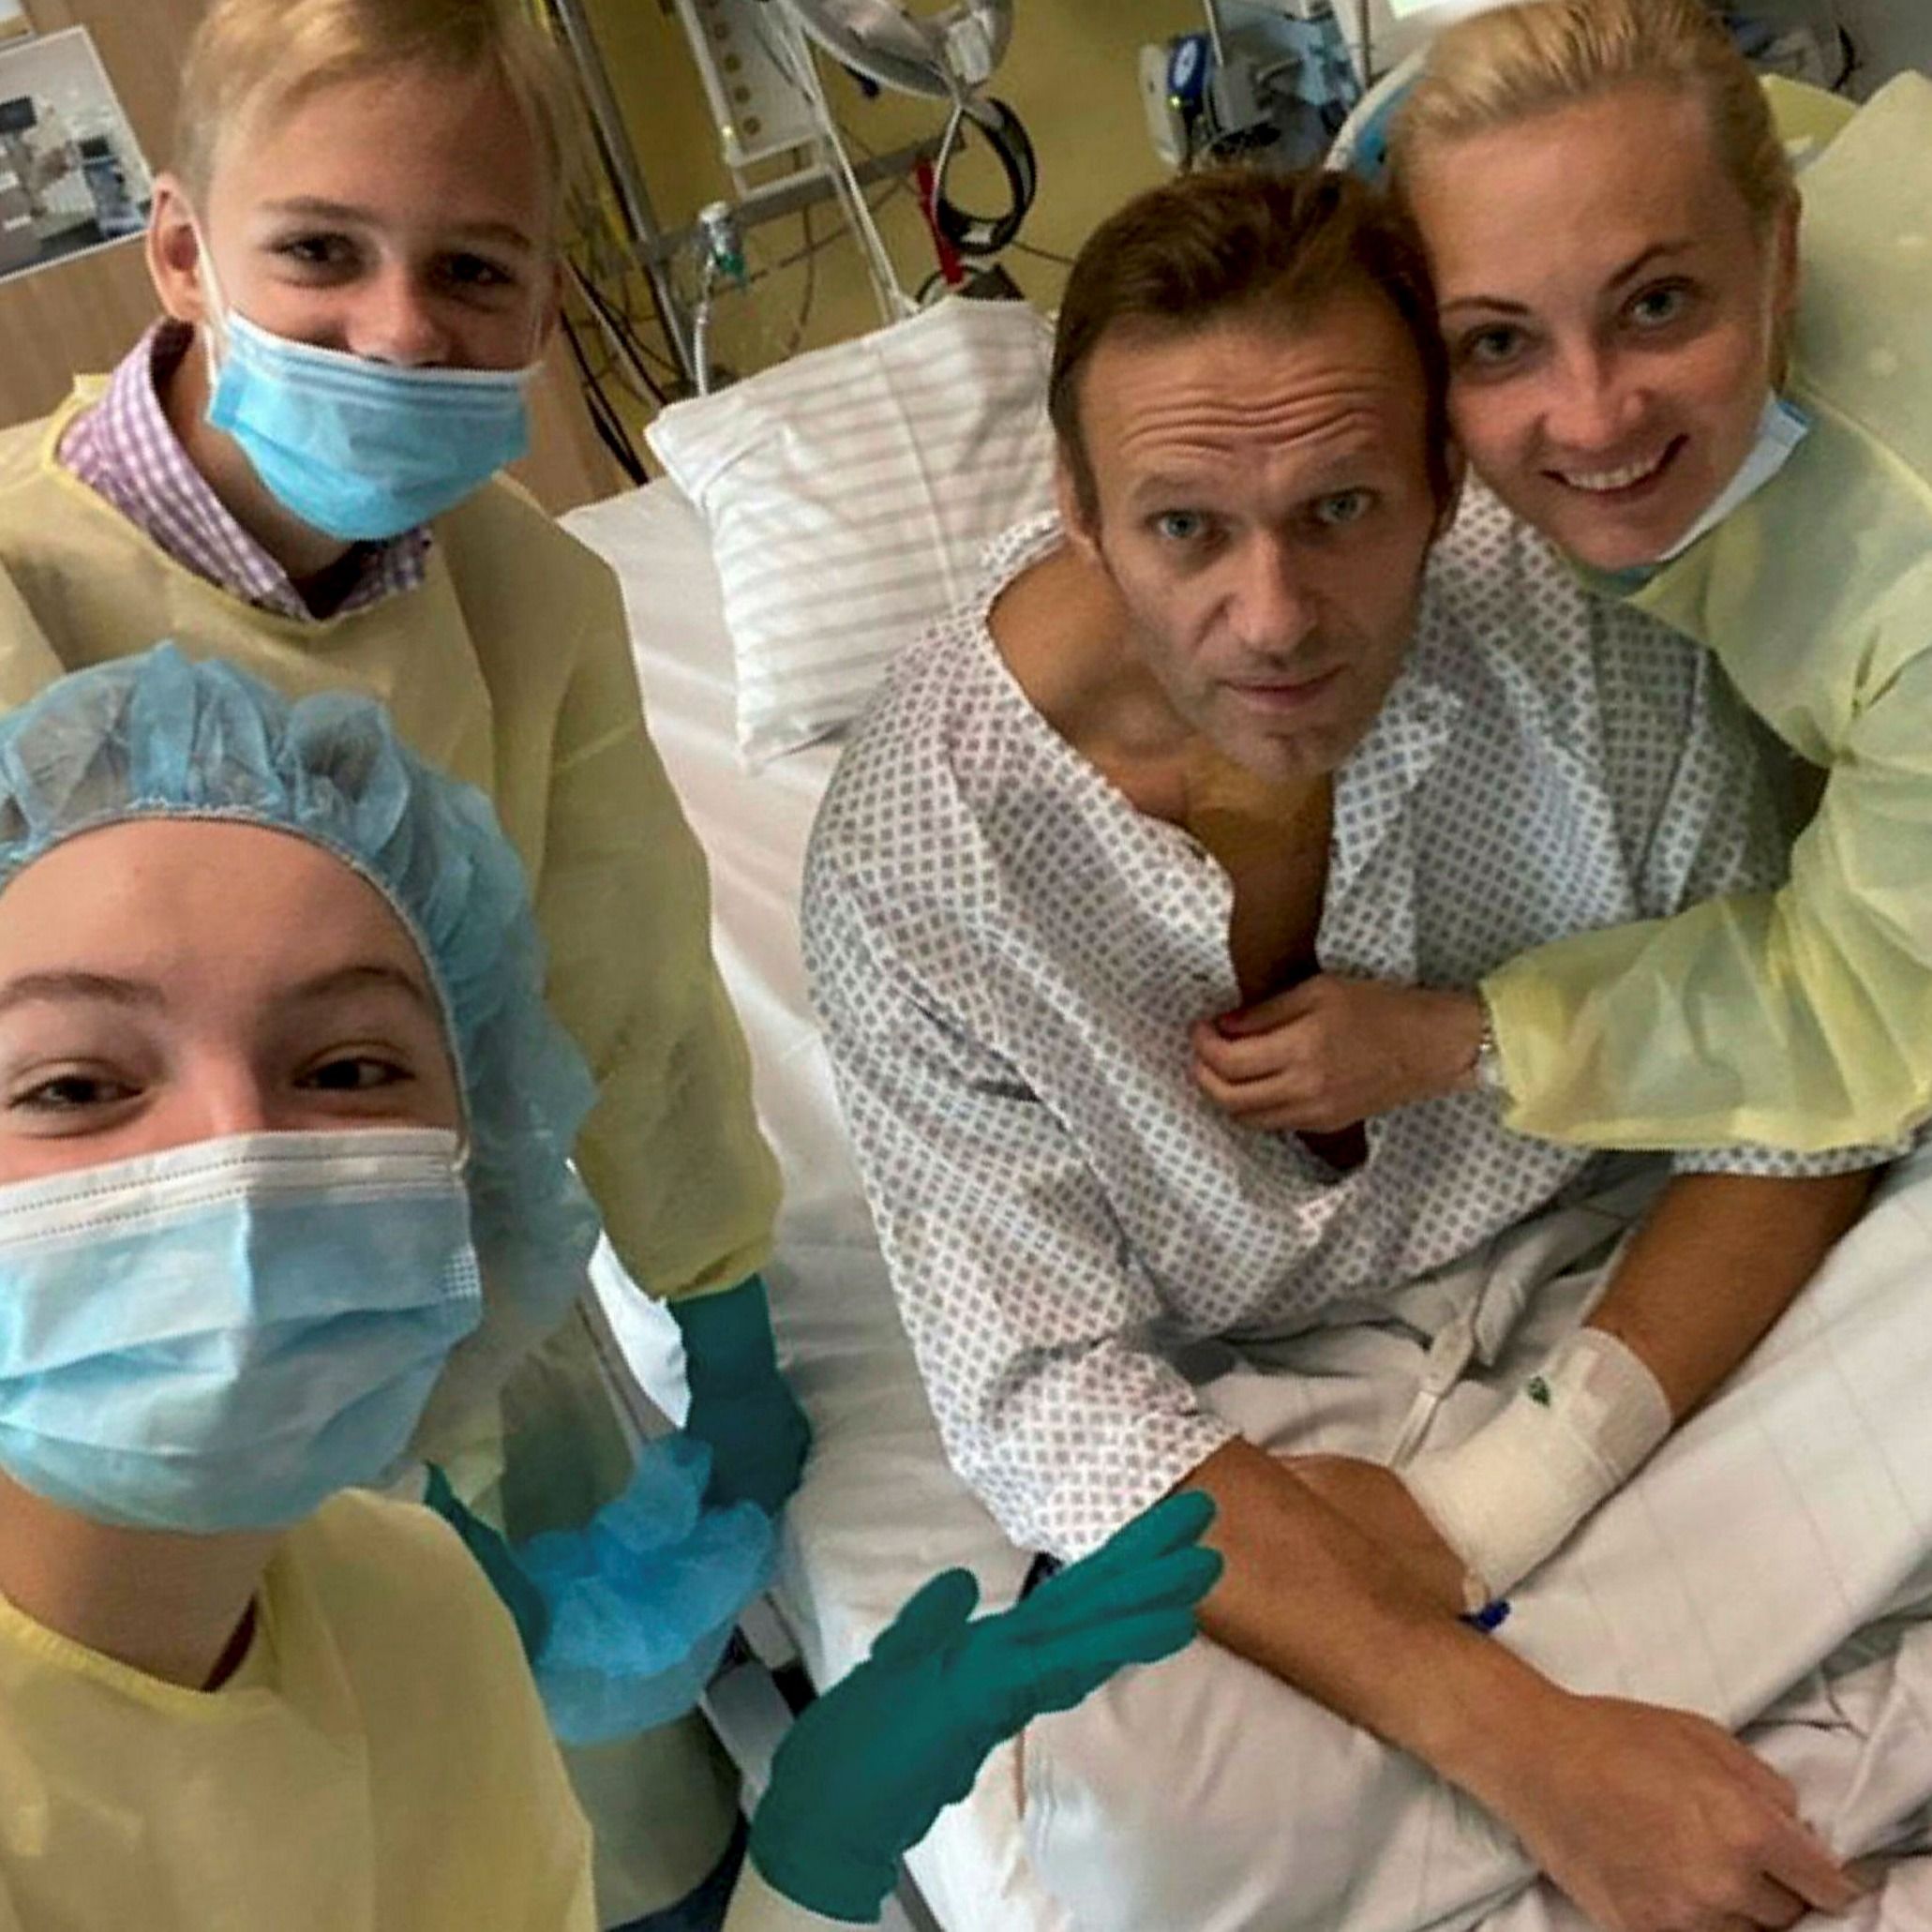 Alexei Navalny and his wife Yulia, daughter Daria and son Zakhar, photographed in a hospital in Berlin, Germany